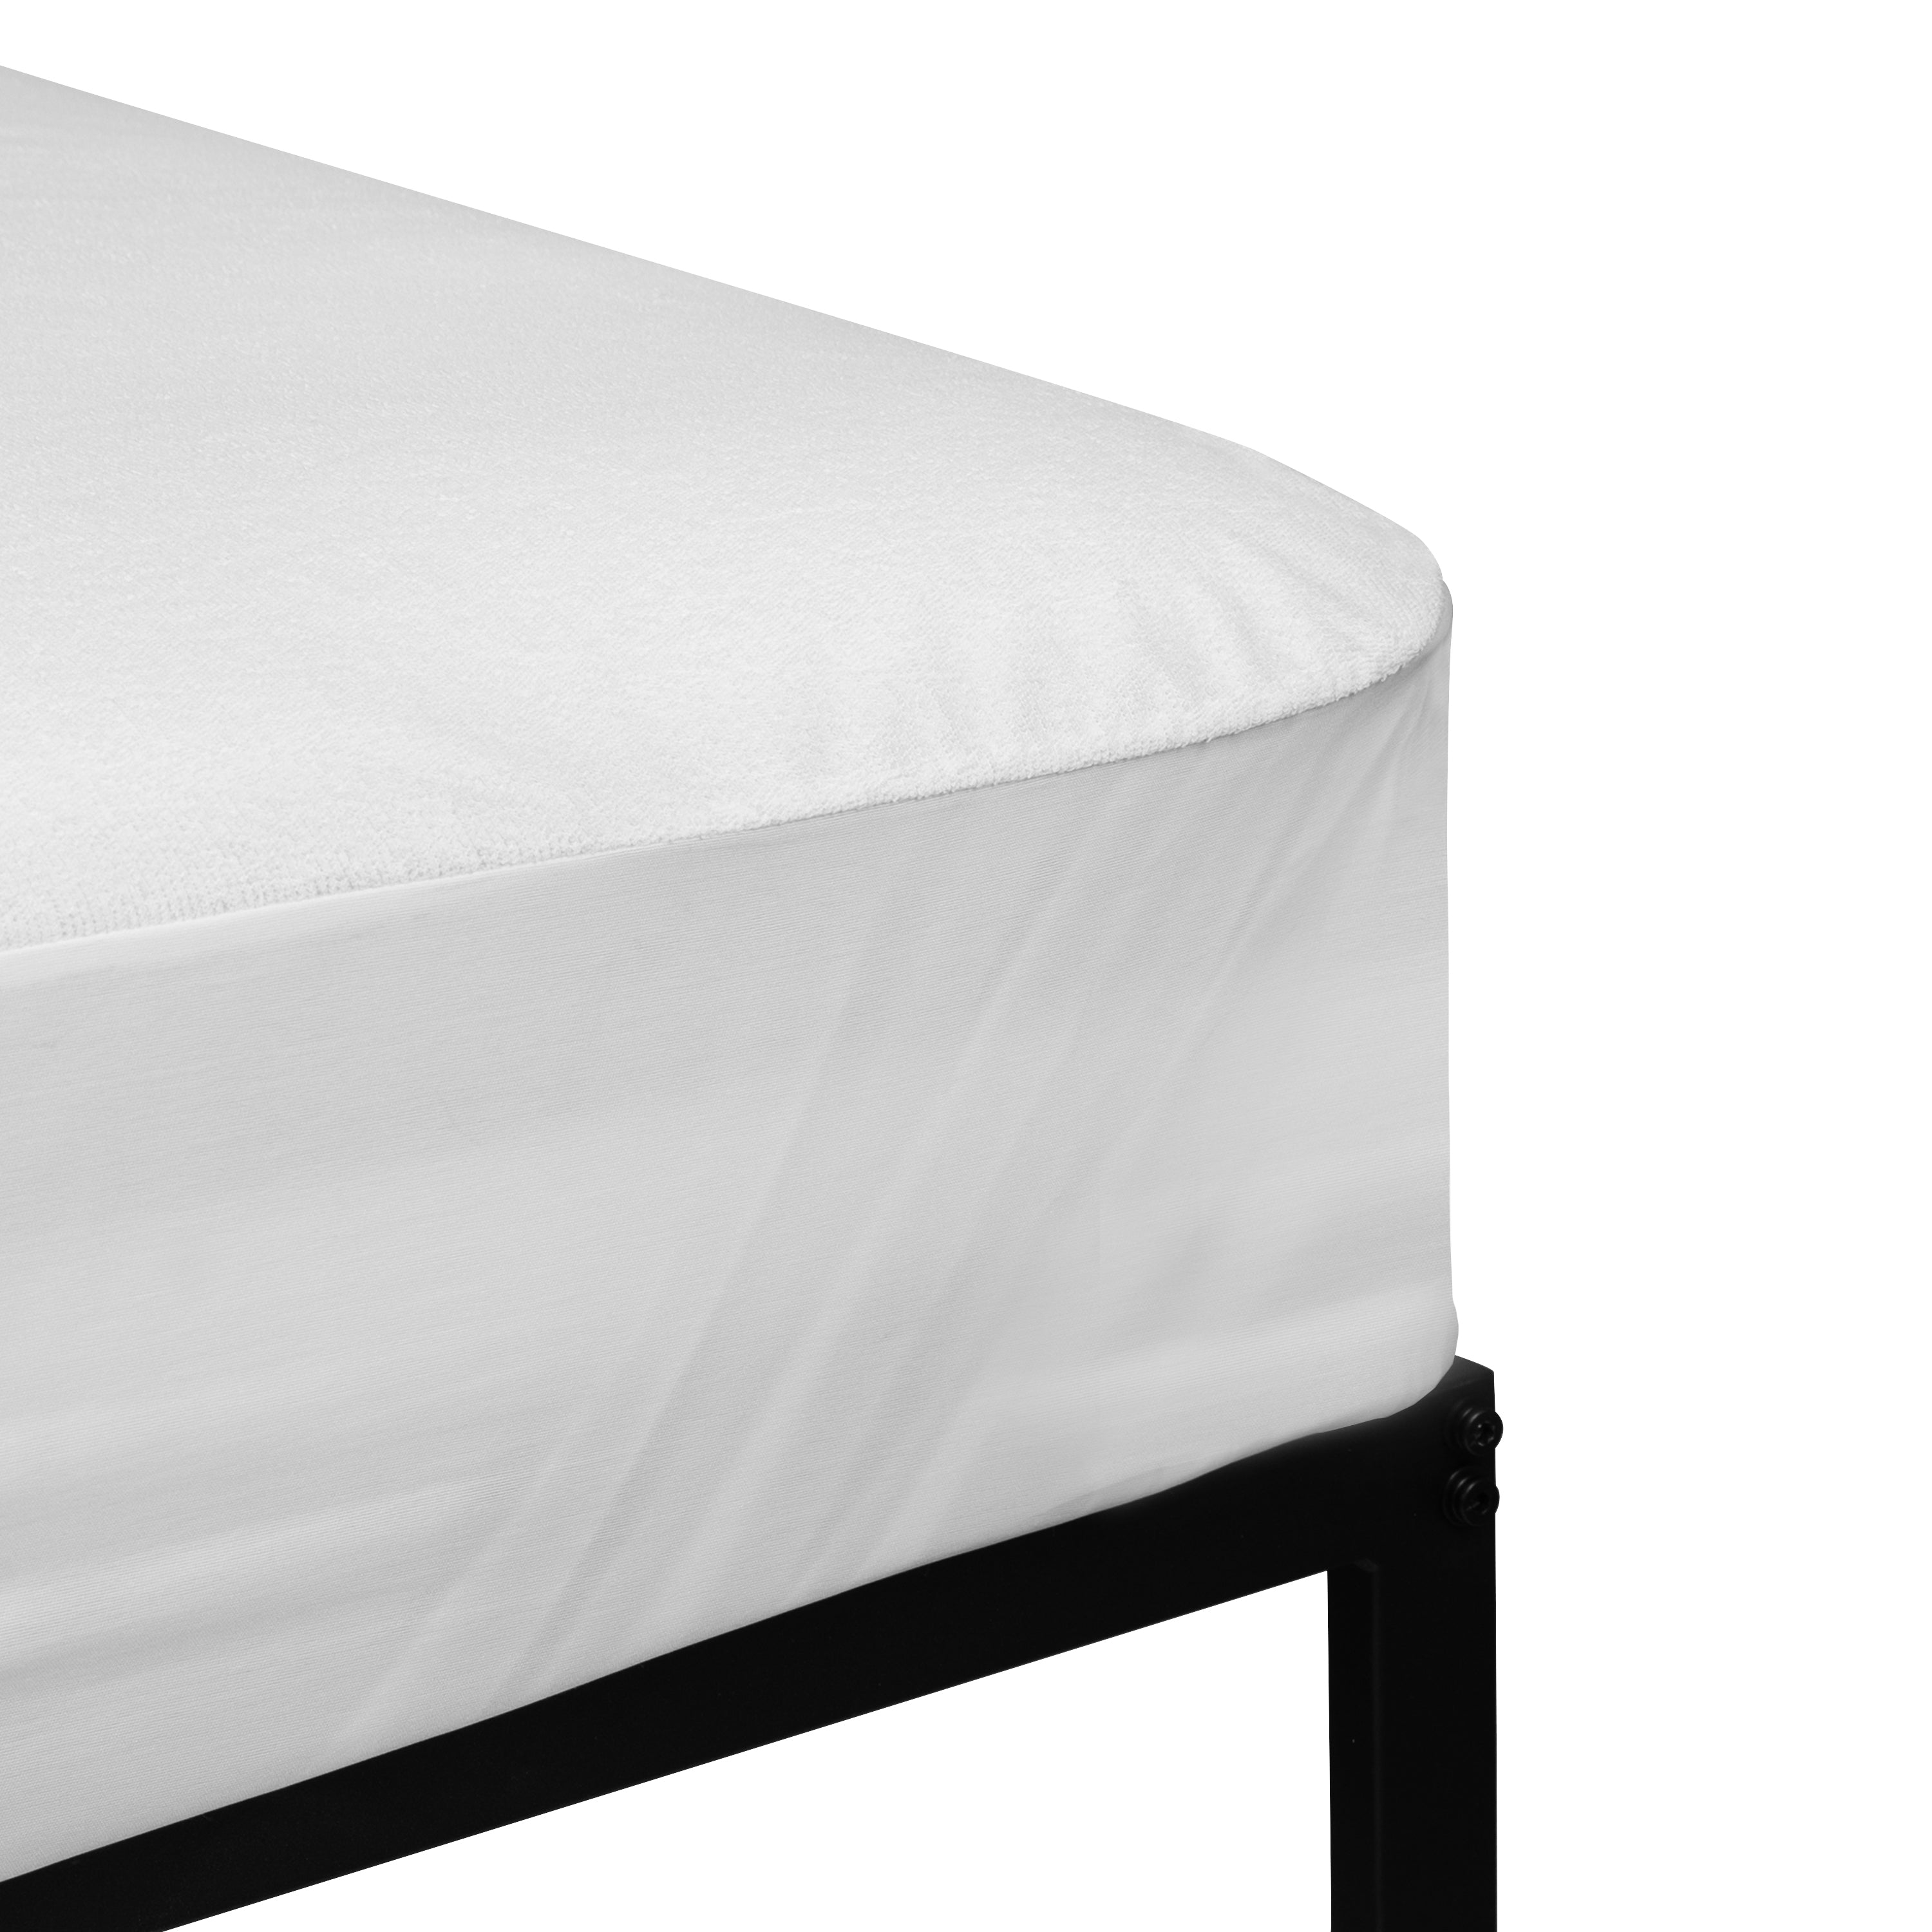 Capri Comfortable Sleep Premium Fitted 100% Waterproof-Hypoallergenic Vinyl Free Mattress Protector - Breathable Smooth Fabric Surface-Mattress Protector-Flash Furniture-Wall2Wall Furnishings